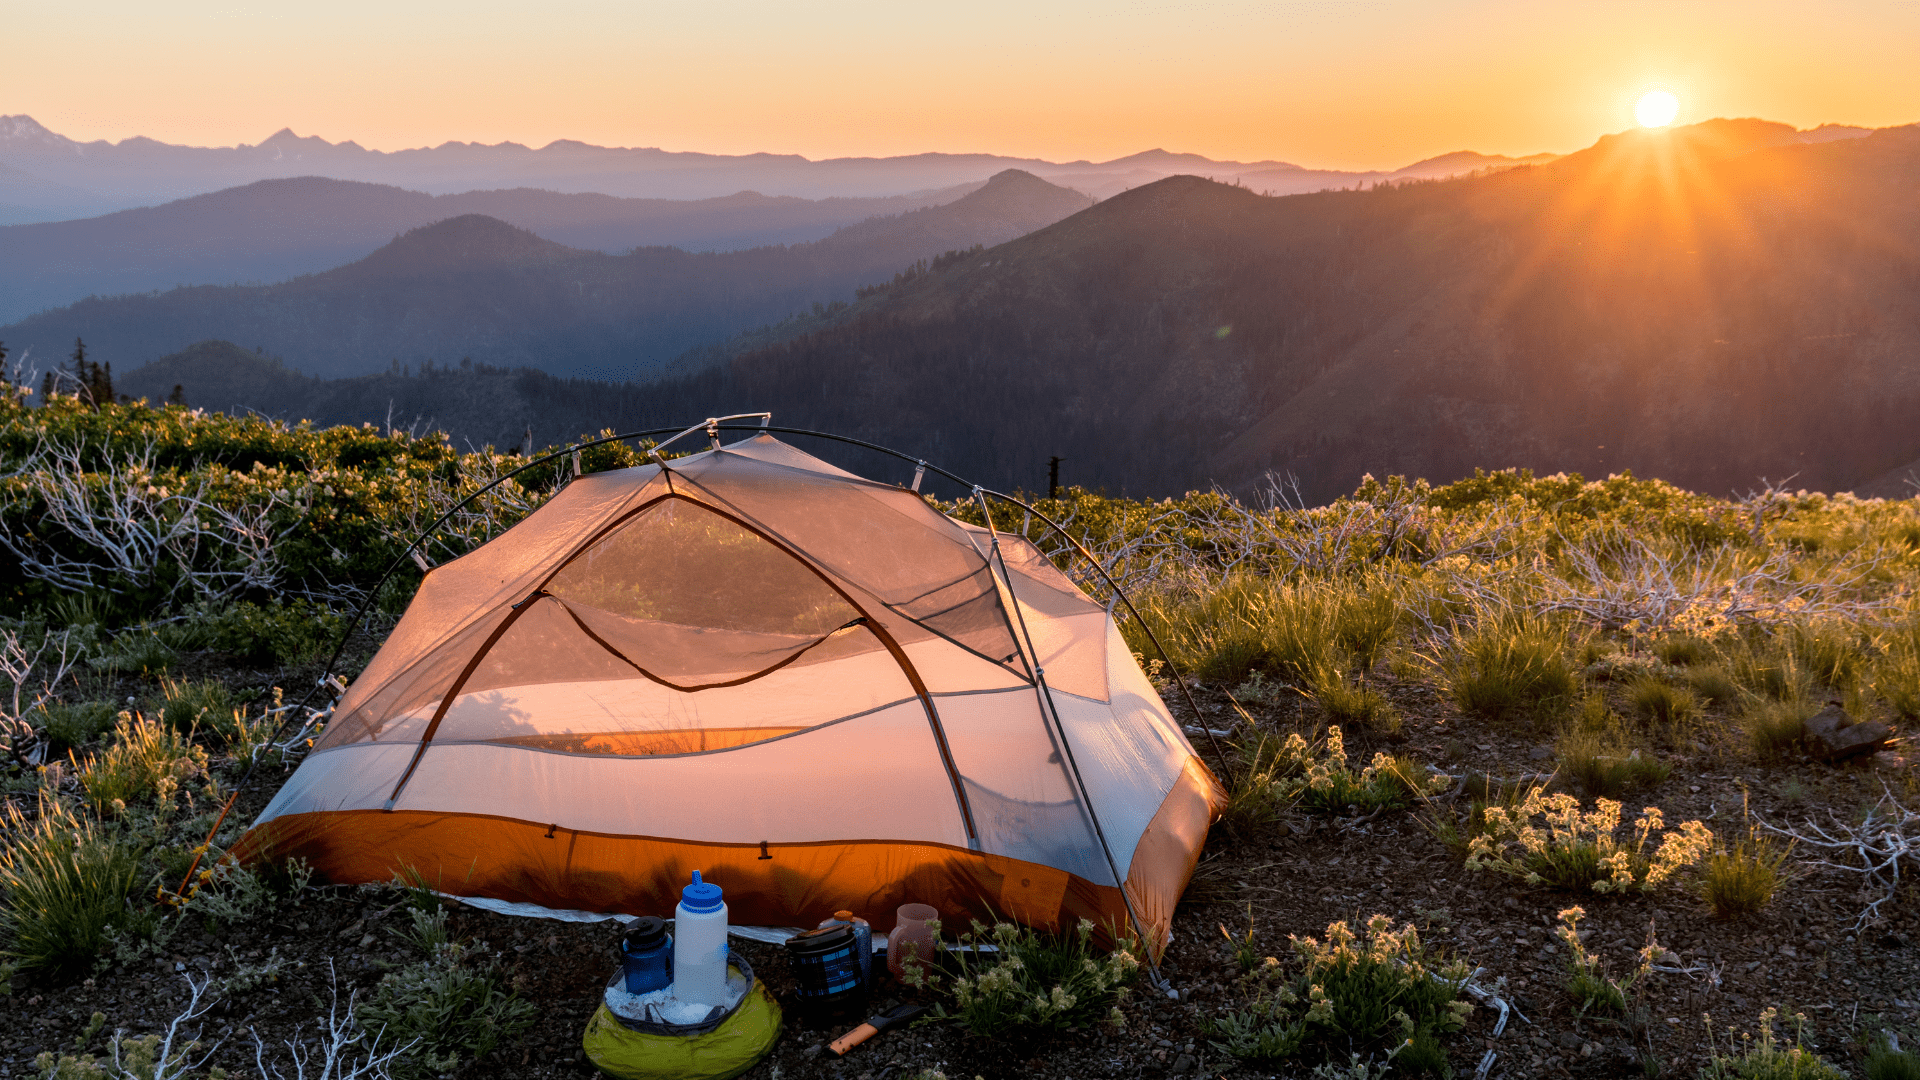 Backpacking tent in front of mountain sunrise